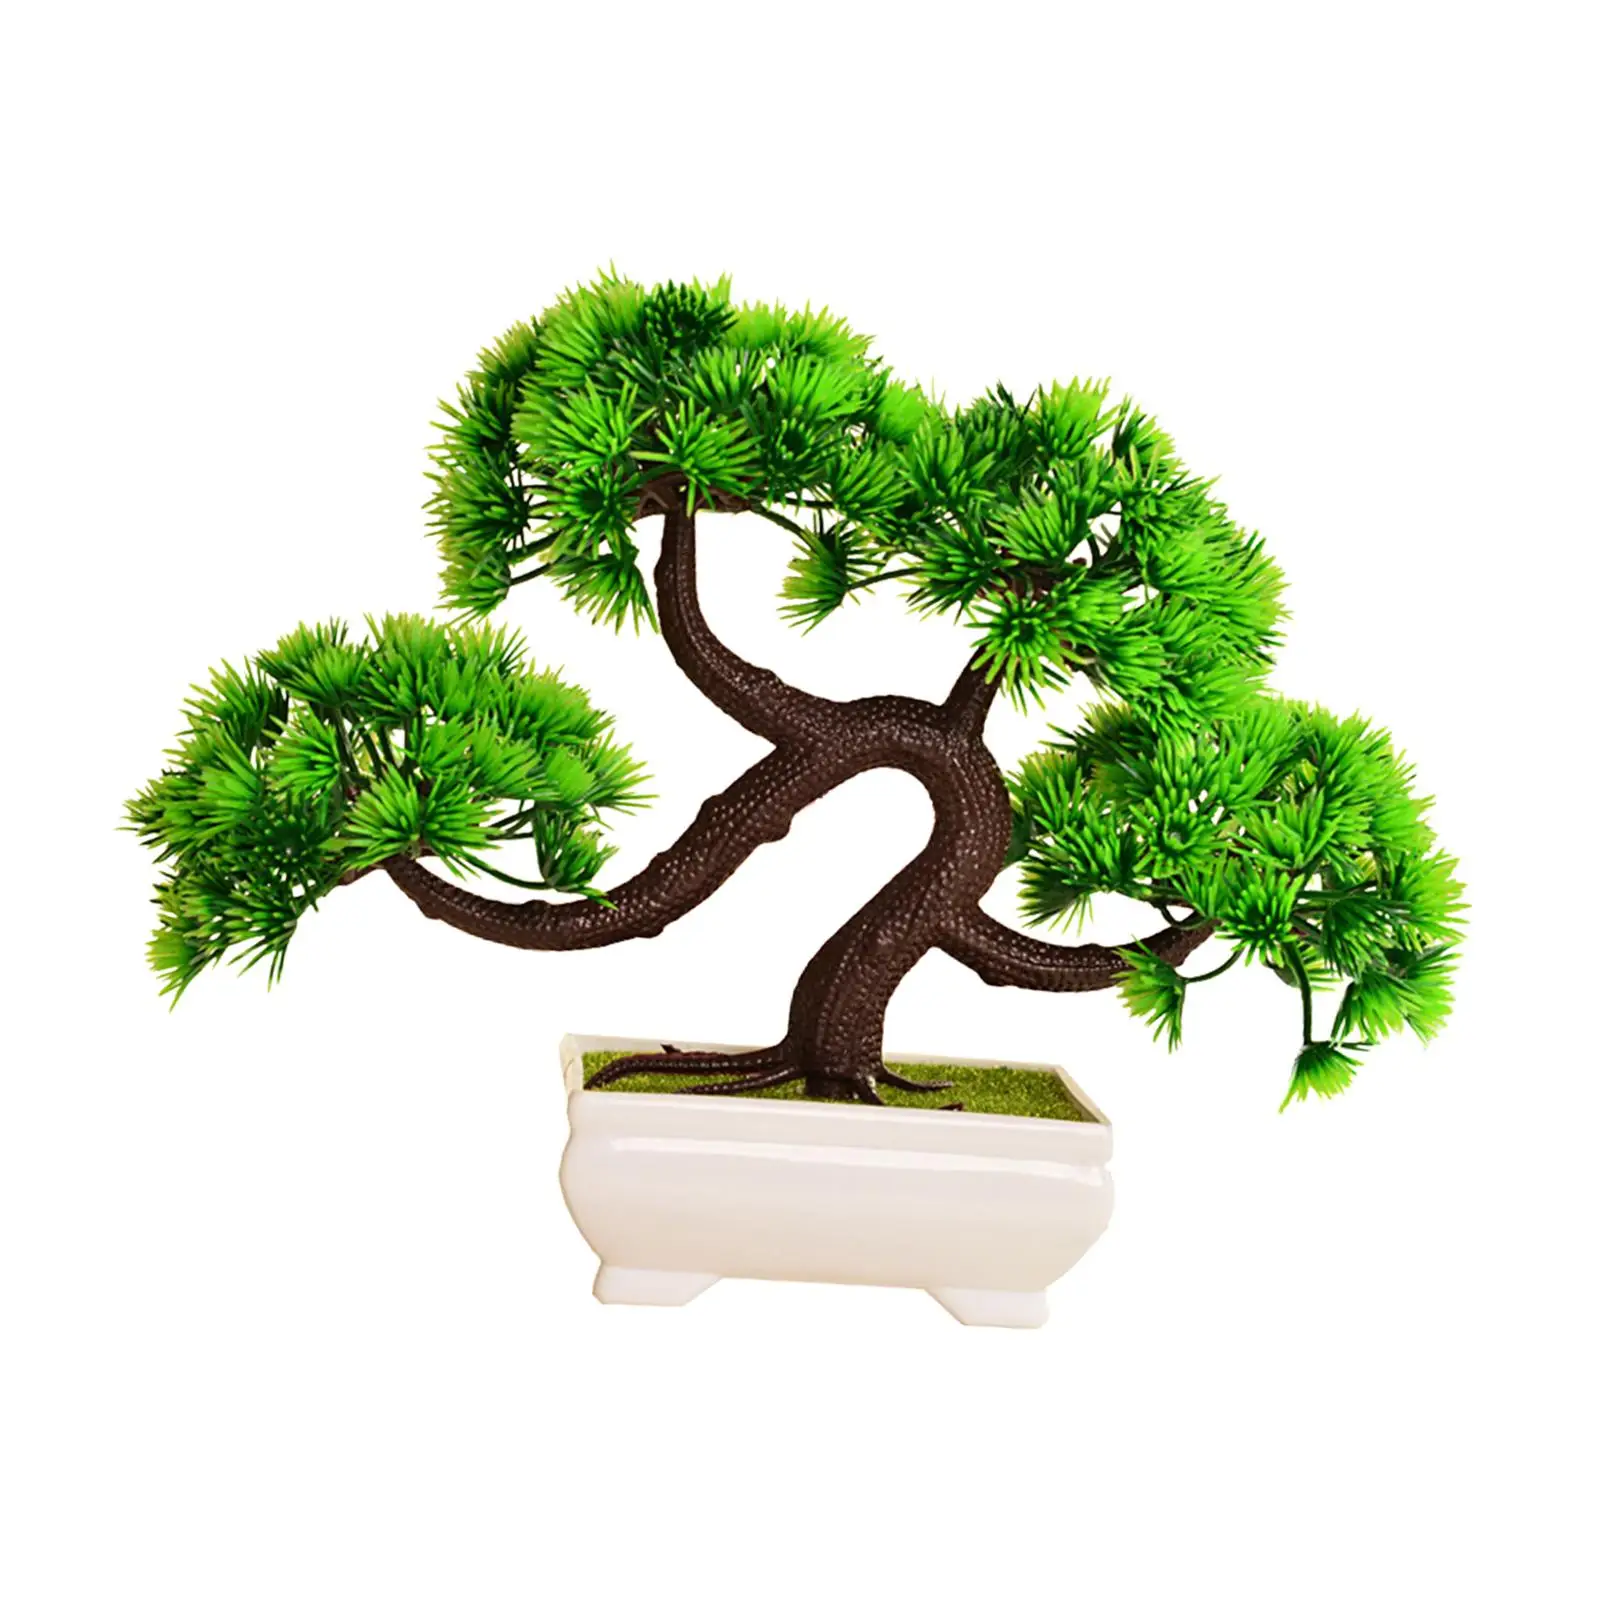 Artificial Bonsai Tree Desk Display Fake Plant Potted Tree Faux Potted Plant for Bedroom Table Living Room Indoor Bookshelf